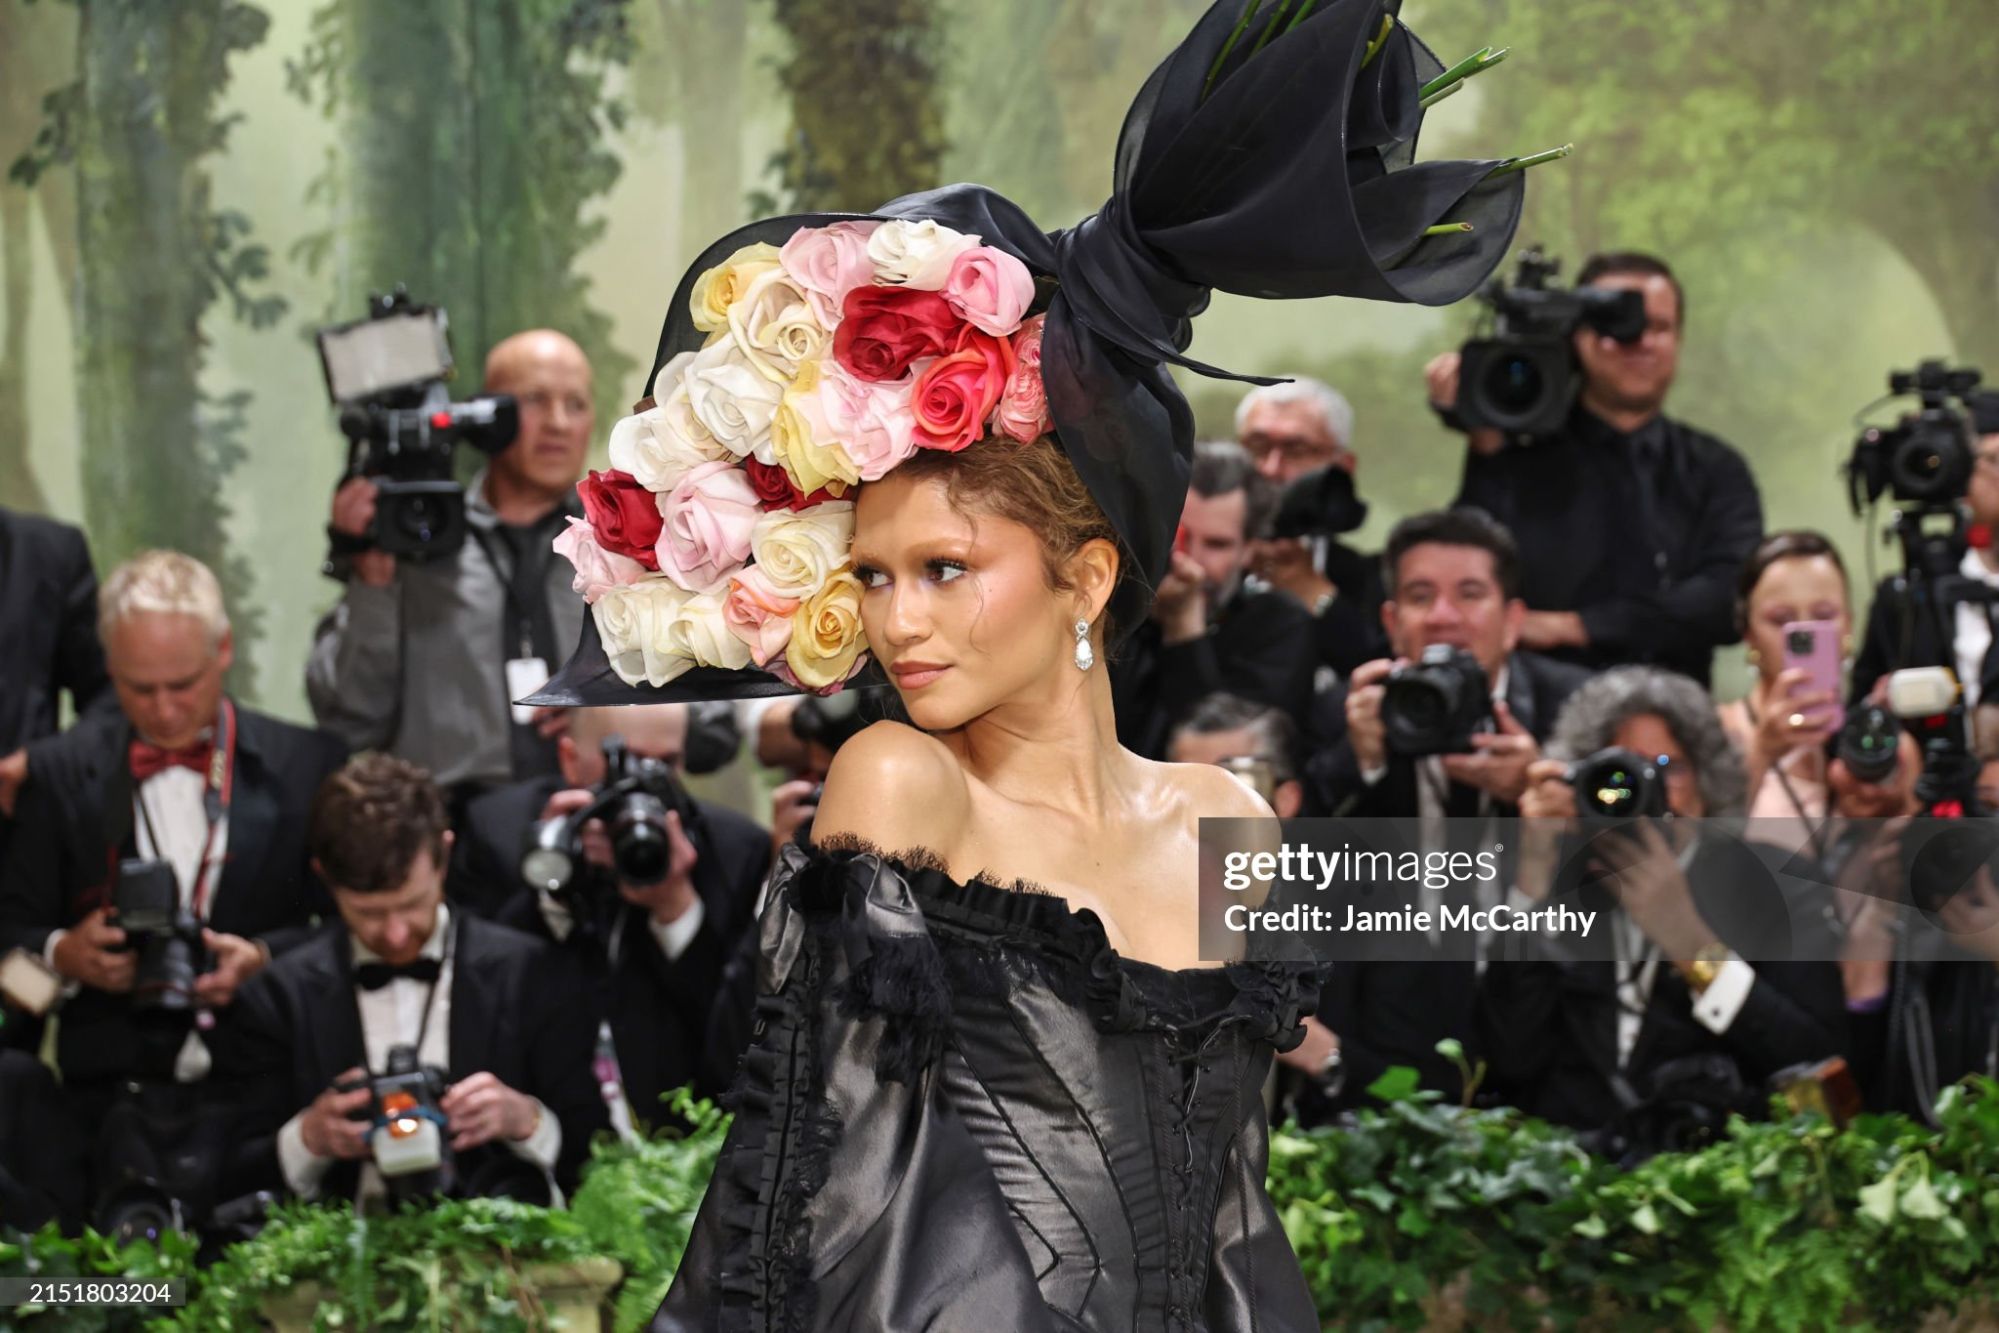 gettyimages-2151803204-2048x2048.jpg